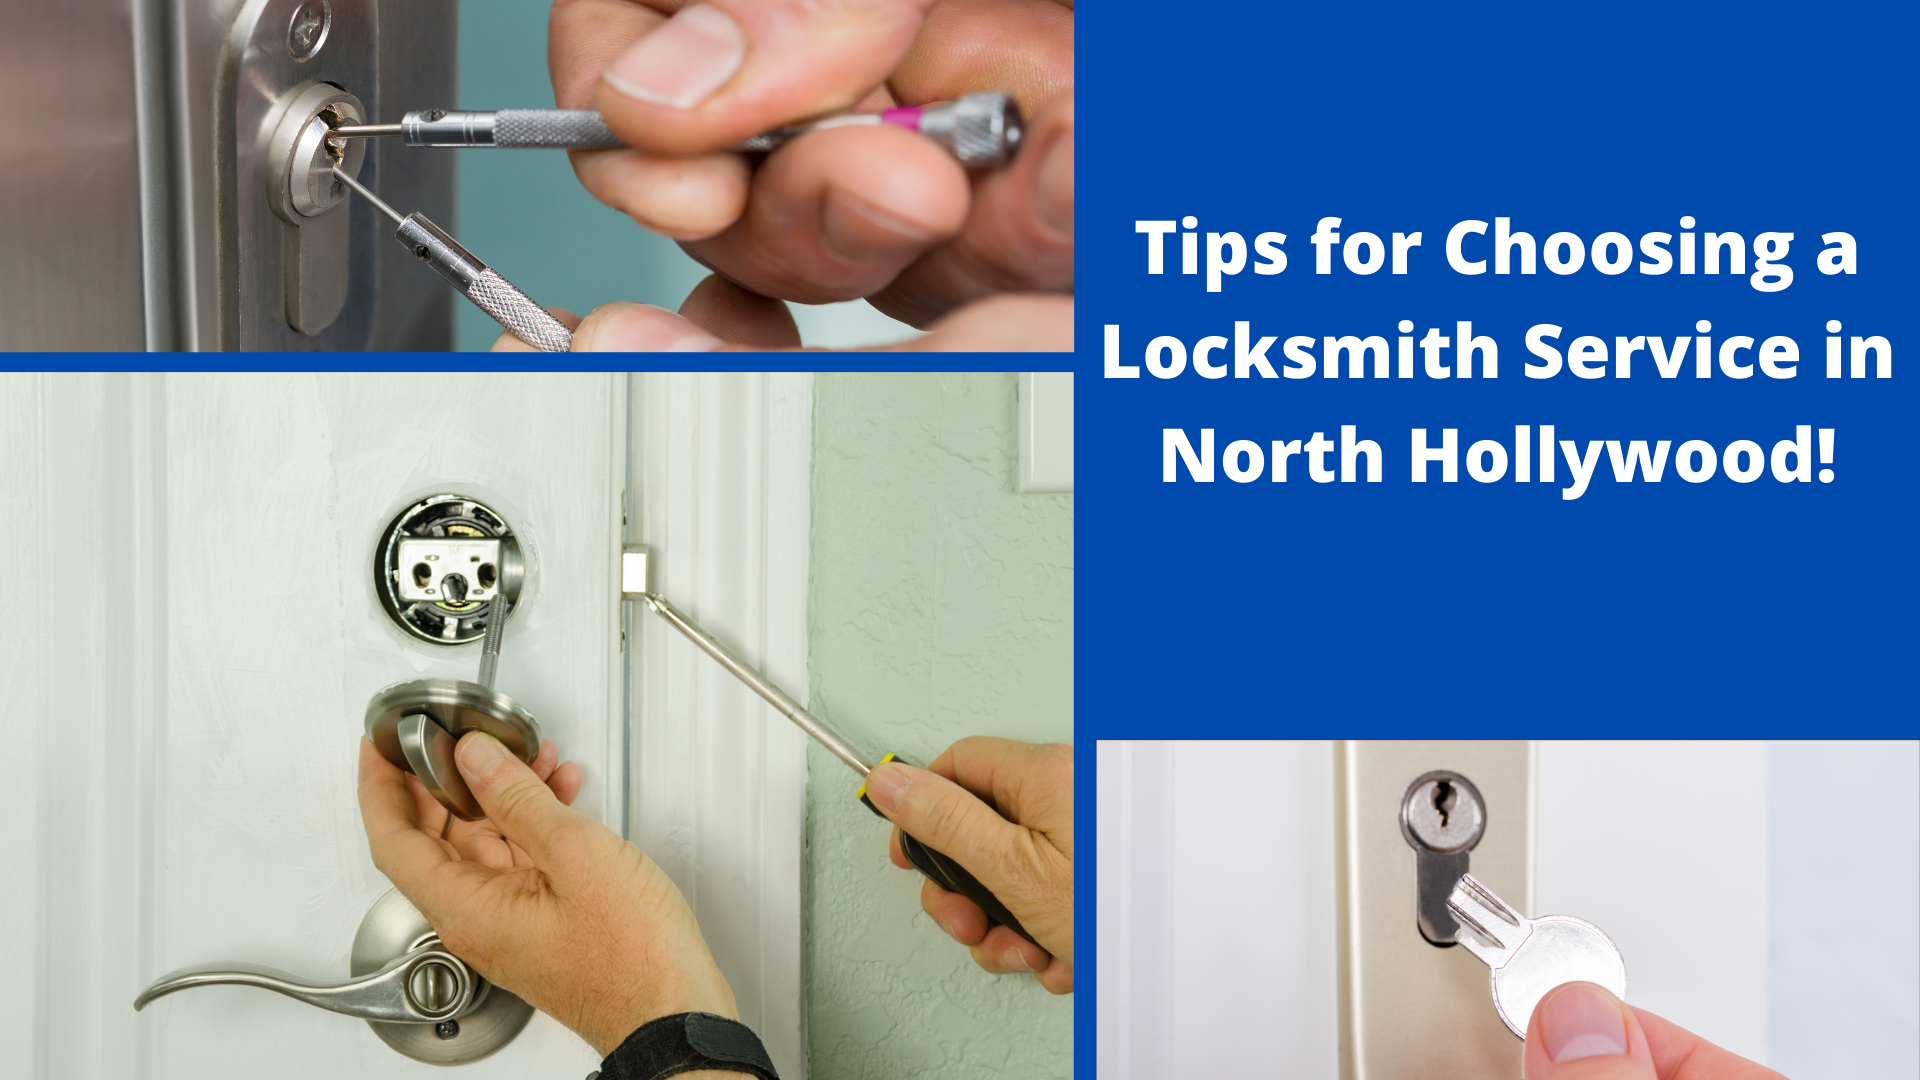 Tips for choosing a locksmith service in north Hollywood!